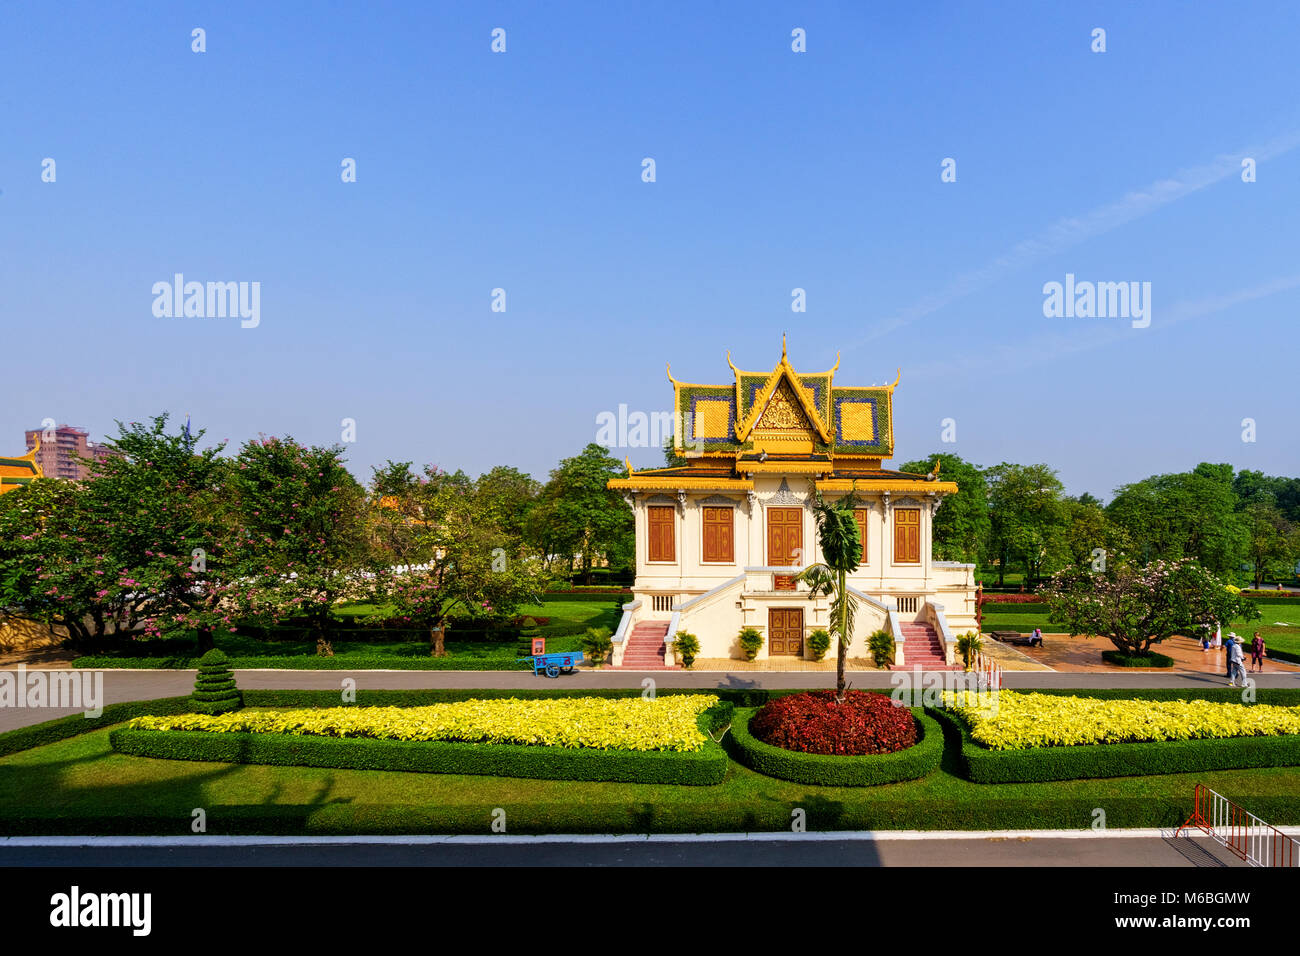 Phnom Penh tourist attraction and famouse landmark - Royal Palace complex, Cambodia Stock Photo